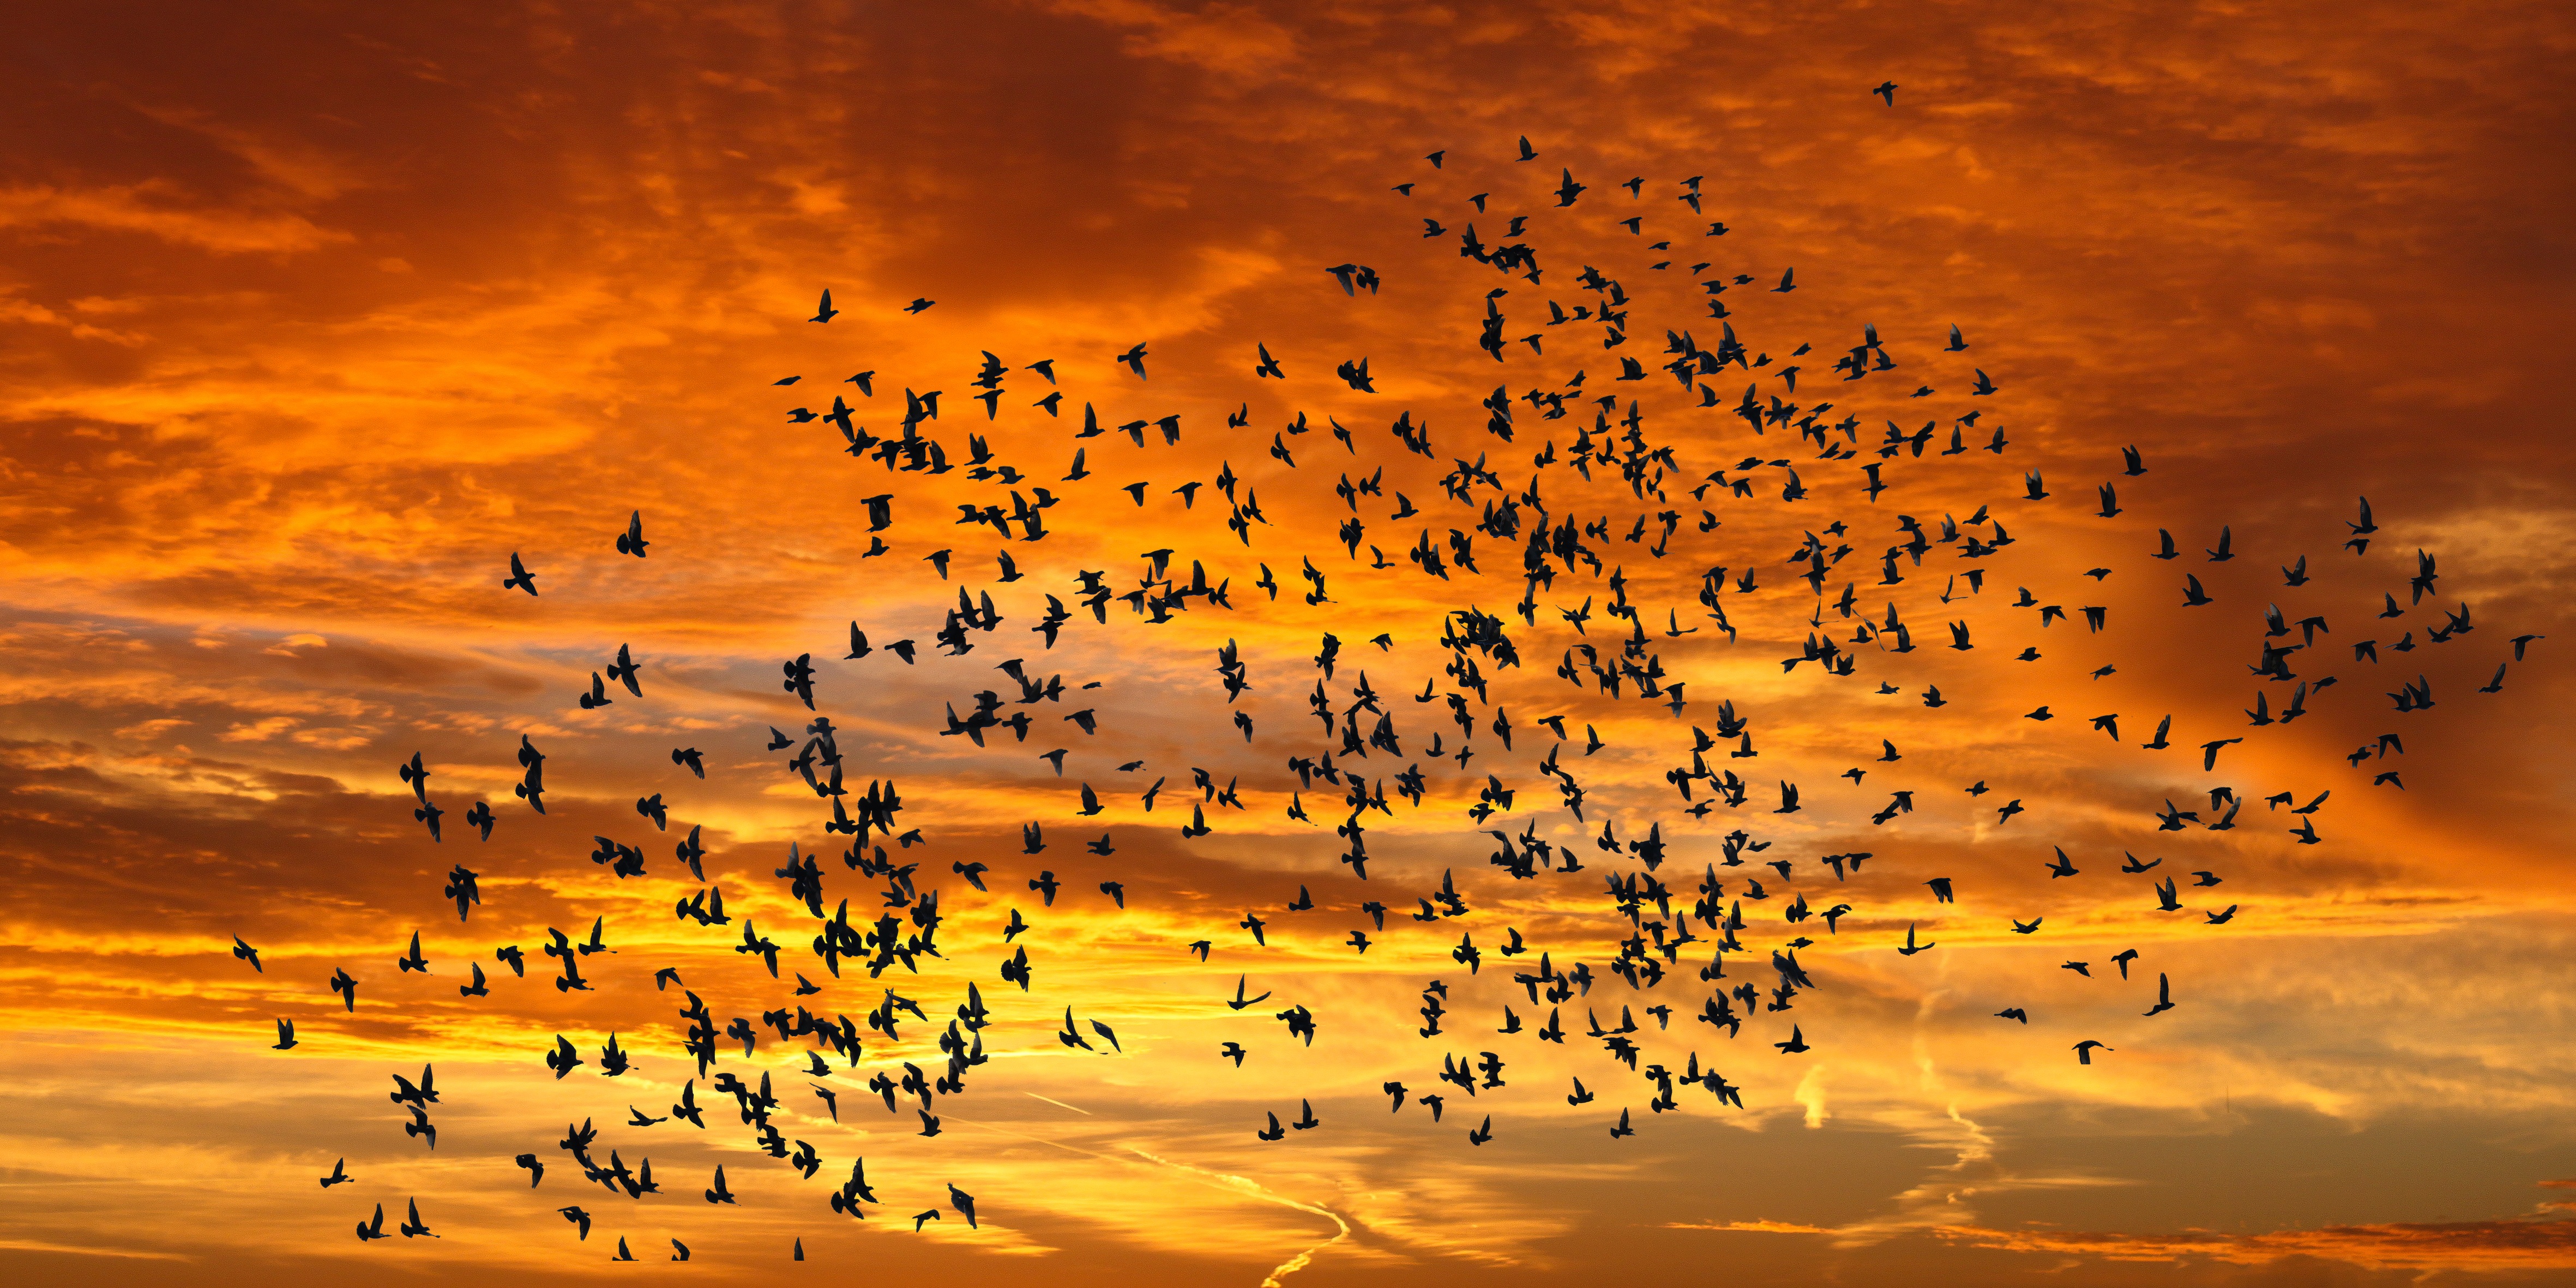 Cool Wallpapers nature, sunset, birds, sky, clouds, silhouettes, flight